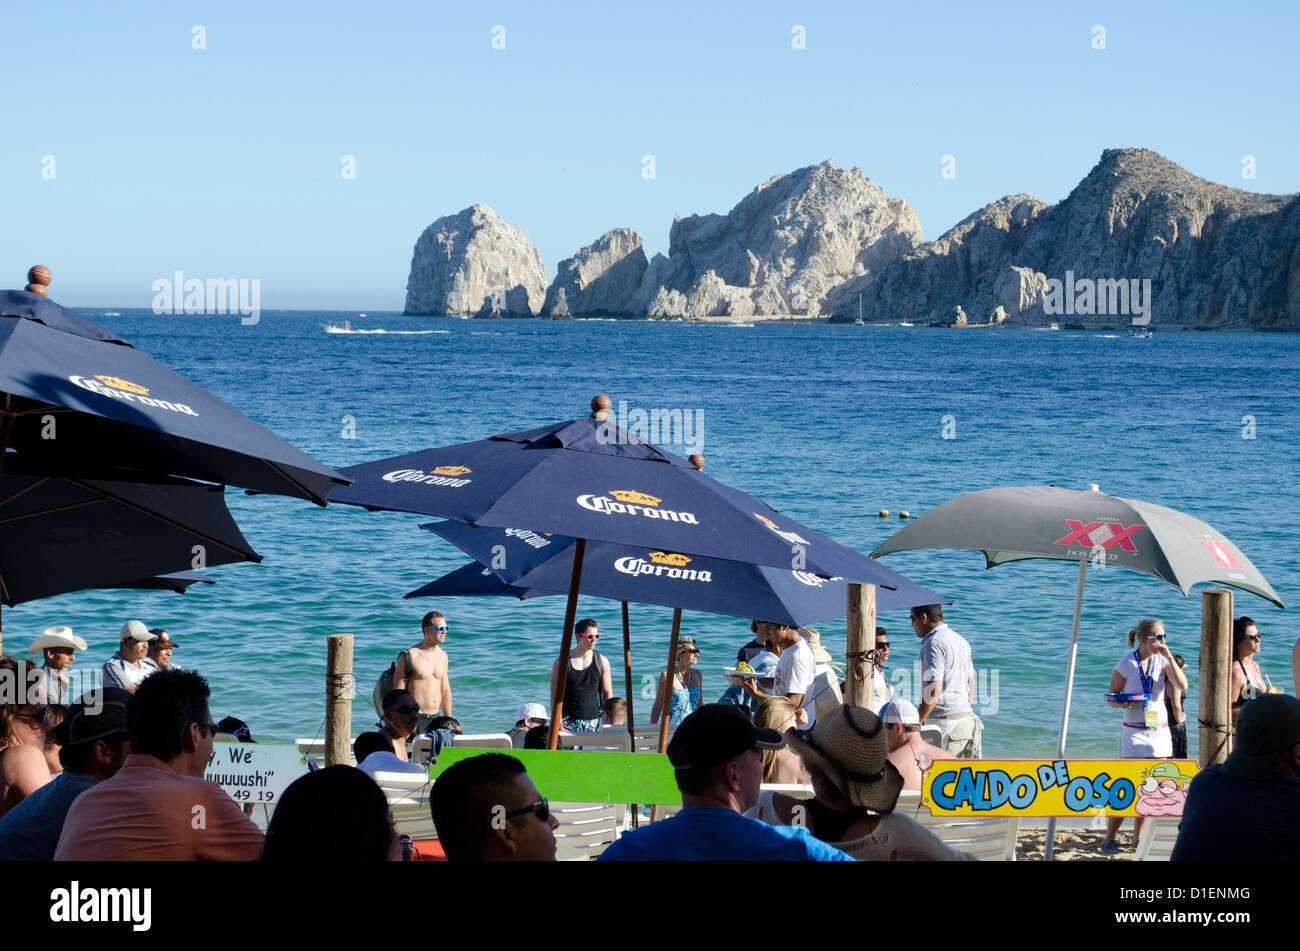 Cabo San Lucas overlooks the Pacific Ocean popular destination for tourists seeking luxury resorts, fine dining and water sports Stock Photo